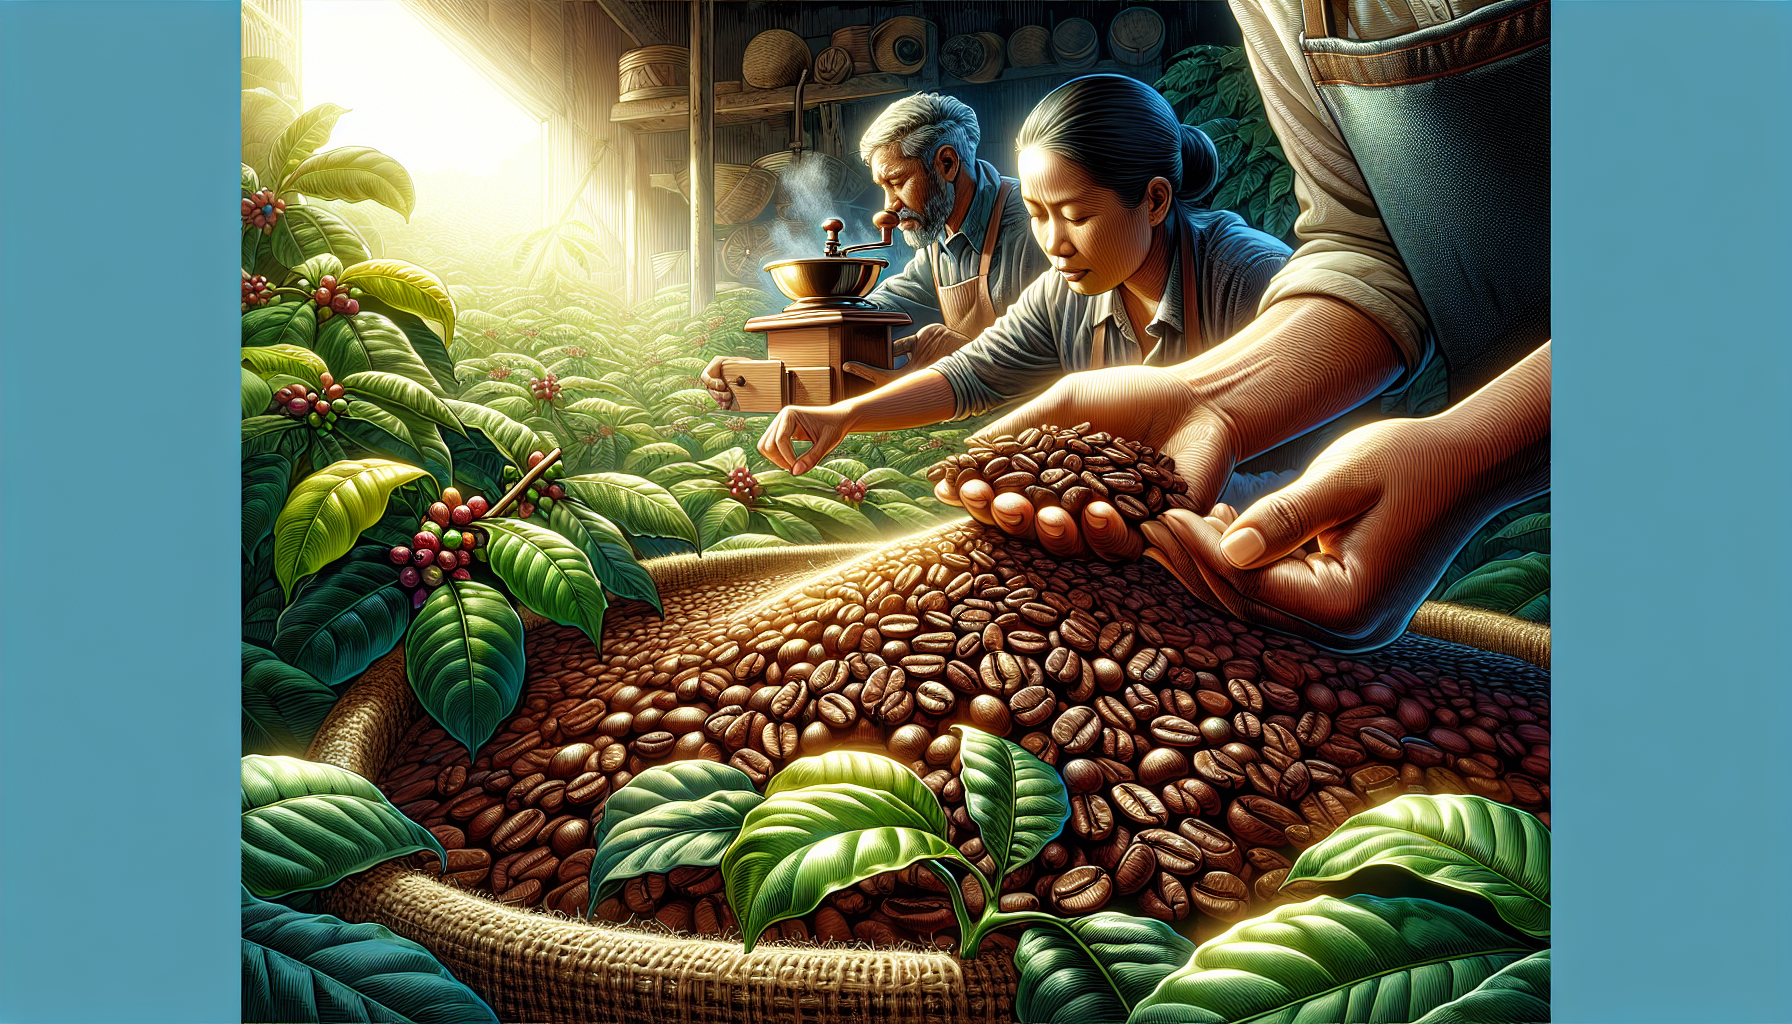 Detailed visual depiction of the richness of organic whole bean coffee. The focal point of the image is a pile of freshly roasted, shiny coffee beans in dark brown color, complemented by the lush gree